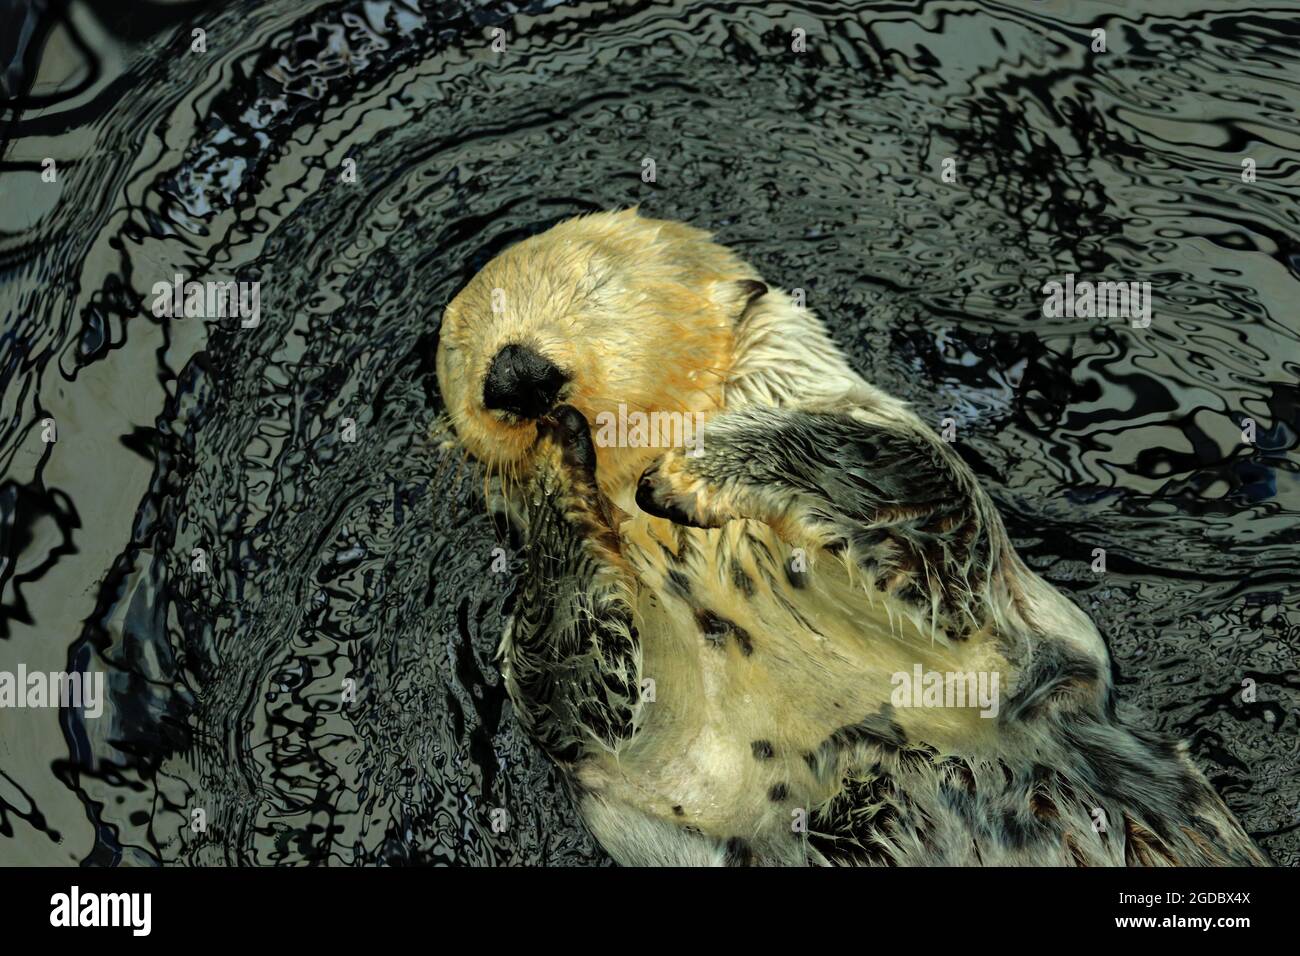 Sea otter posing in the water Stock Photo